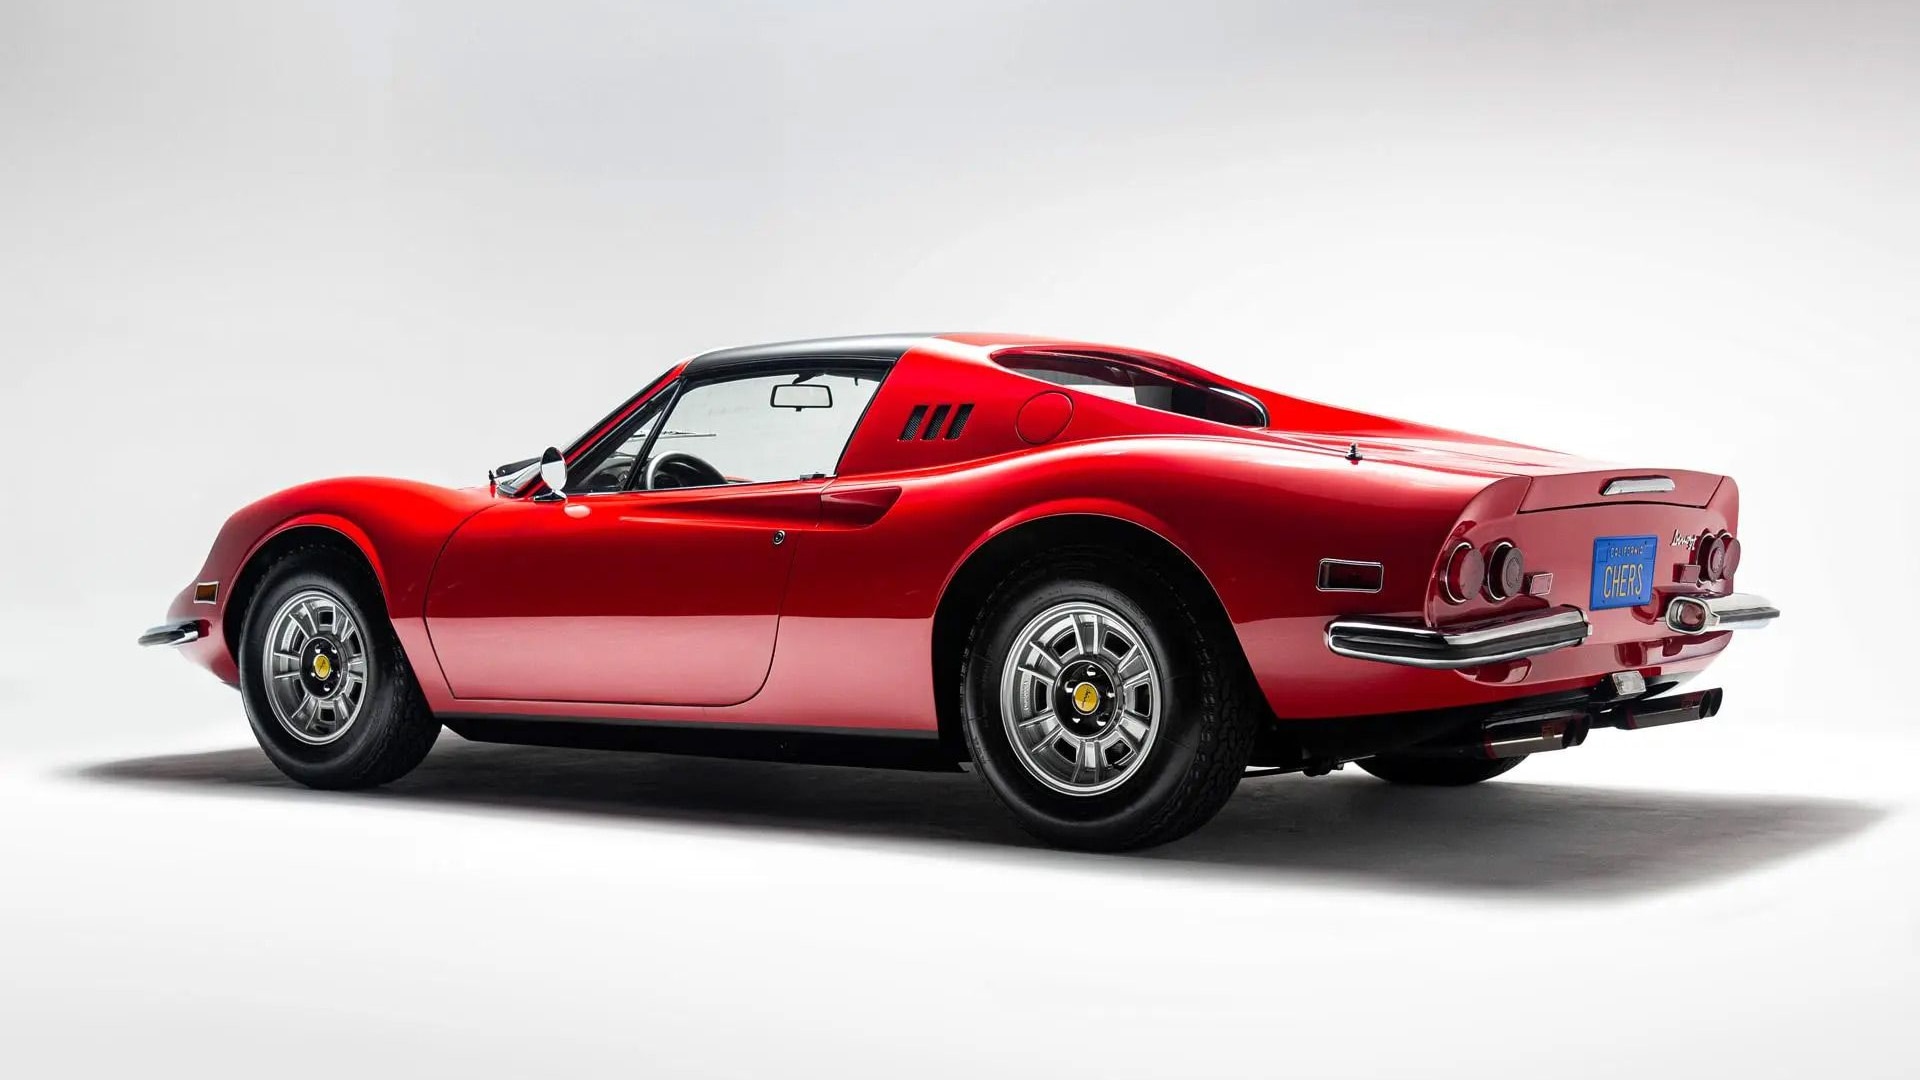 1972 Ferrari Dino 246 GTS once owned by Cher - Photo credit: Bring a Trailer